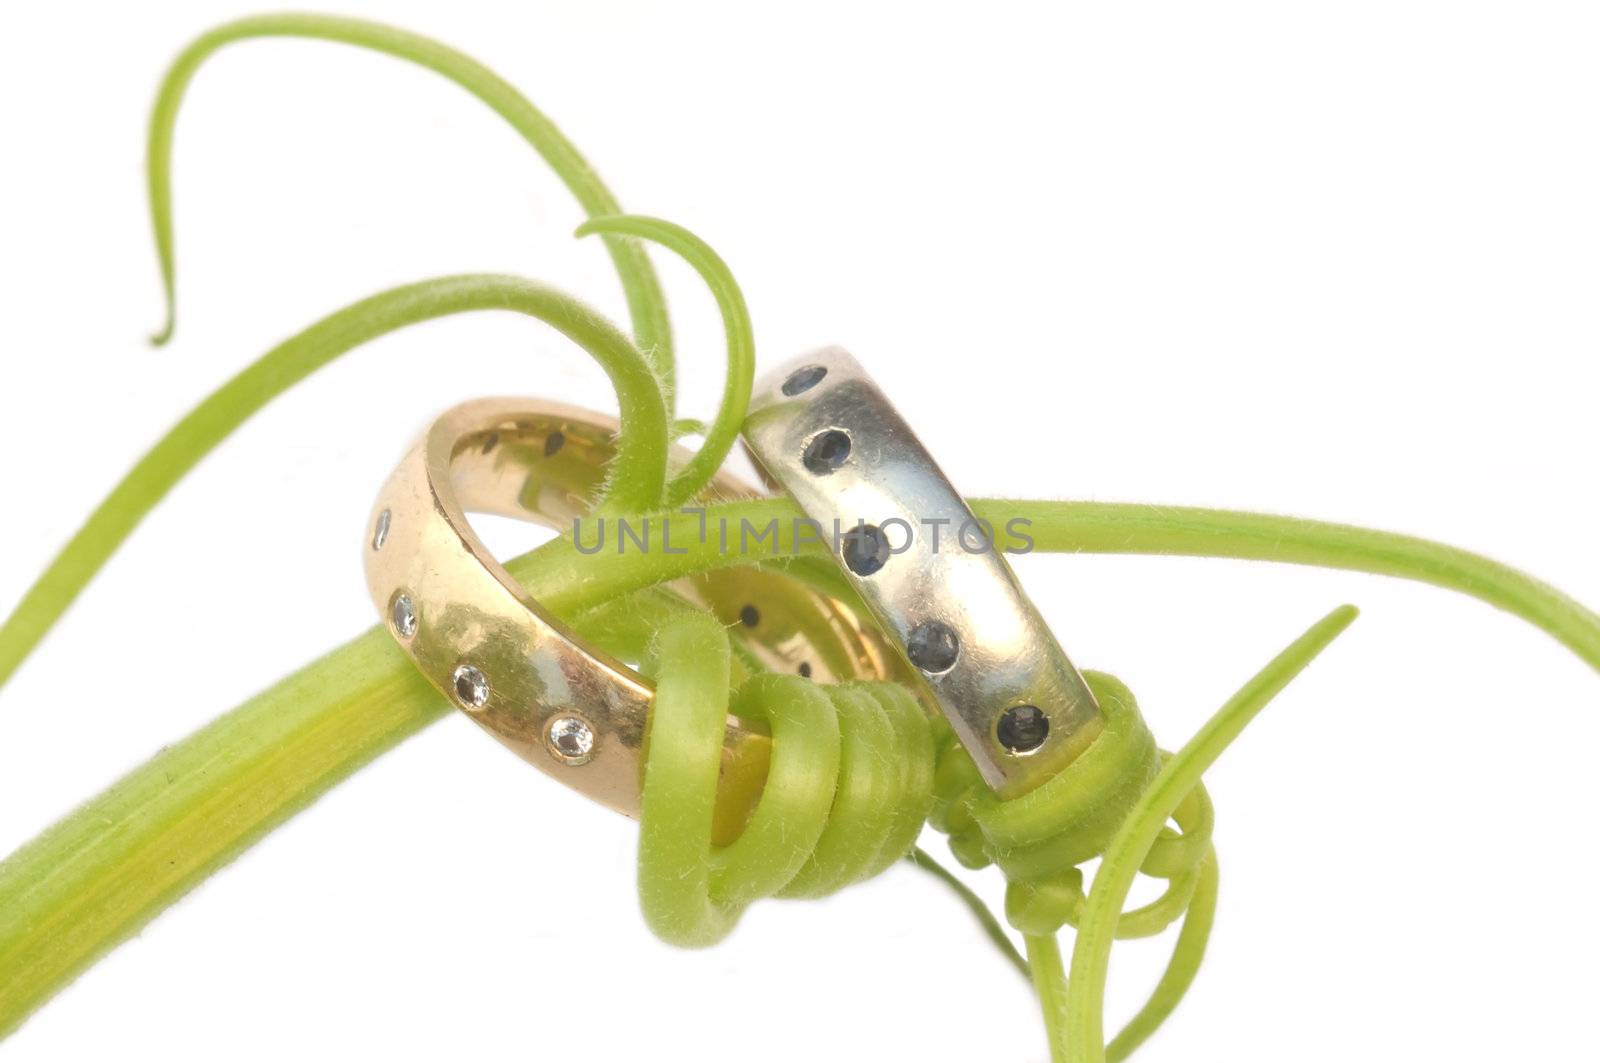 A pair of wedding rings, one white gold with sapphires and the other yellow gold with diamonds, are twined together with a green vine.